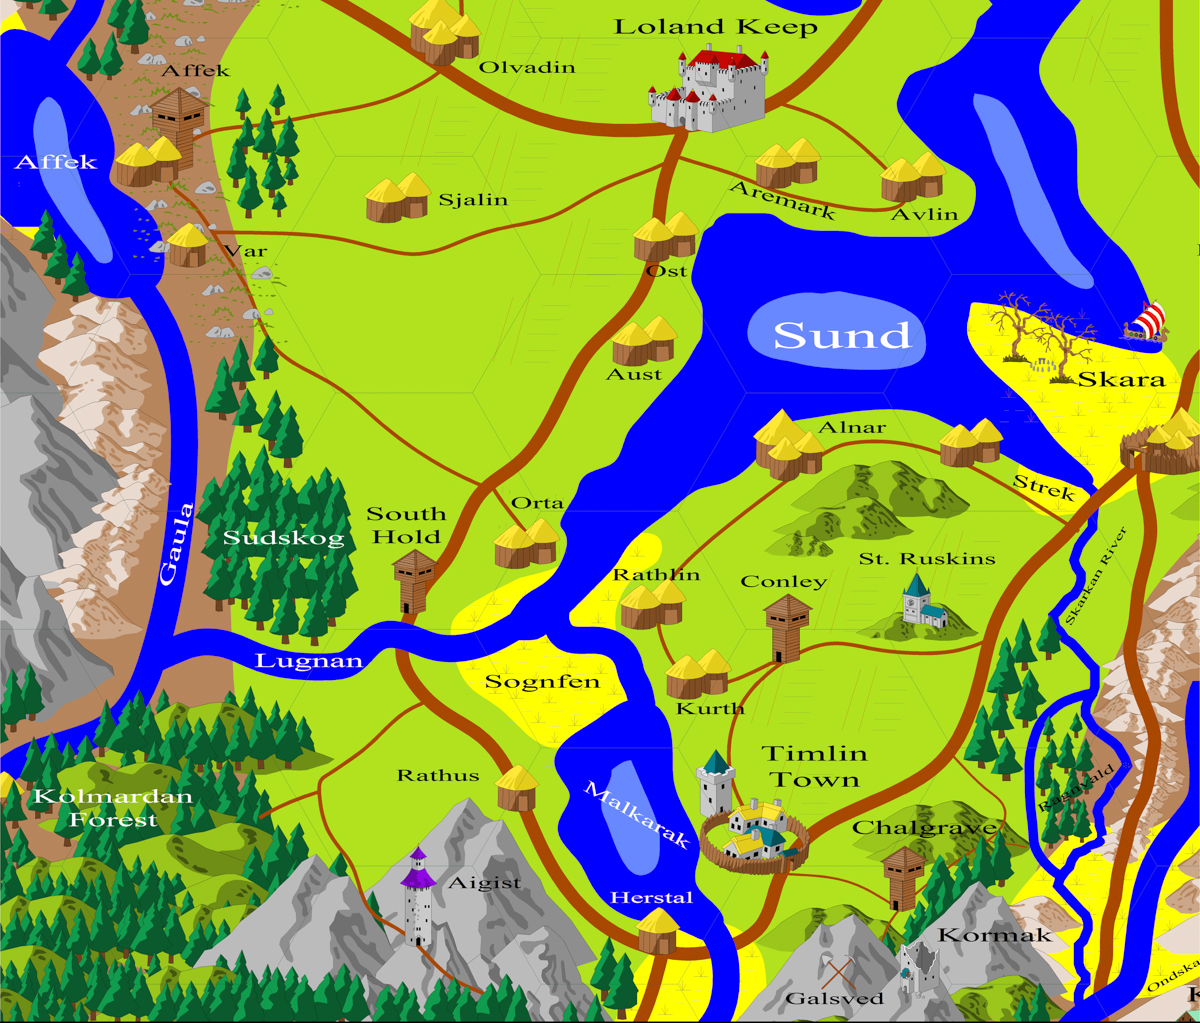 South Gautria and Lands of Timlin